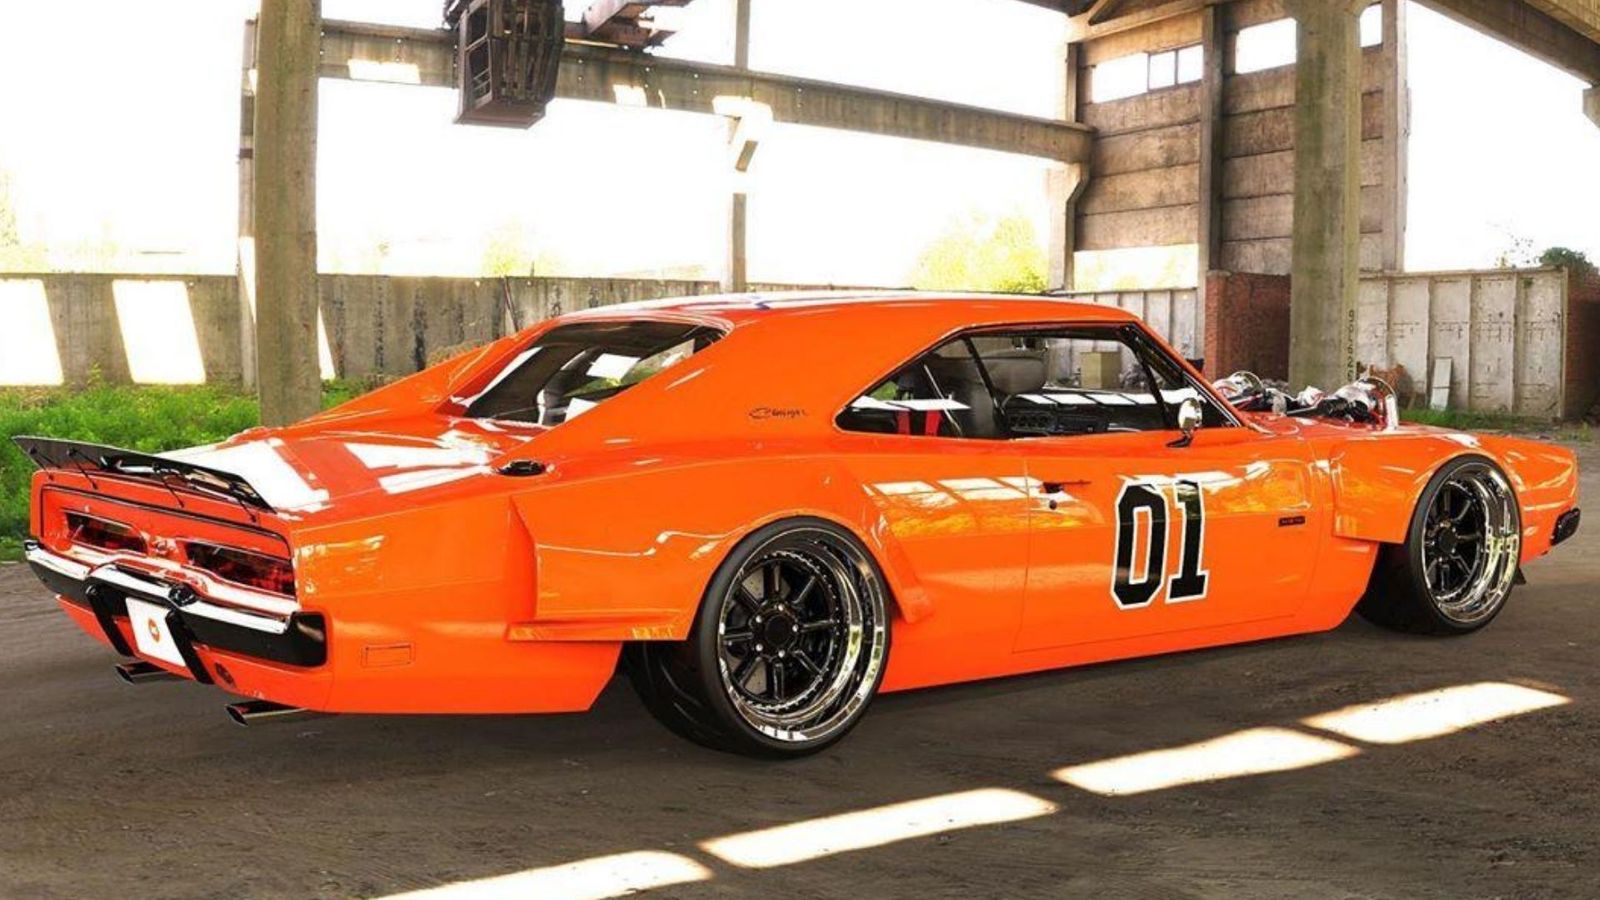 Artist Imagines Turbocharged And Bagged General Lee